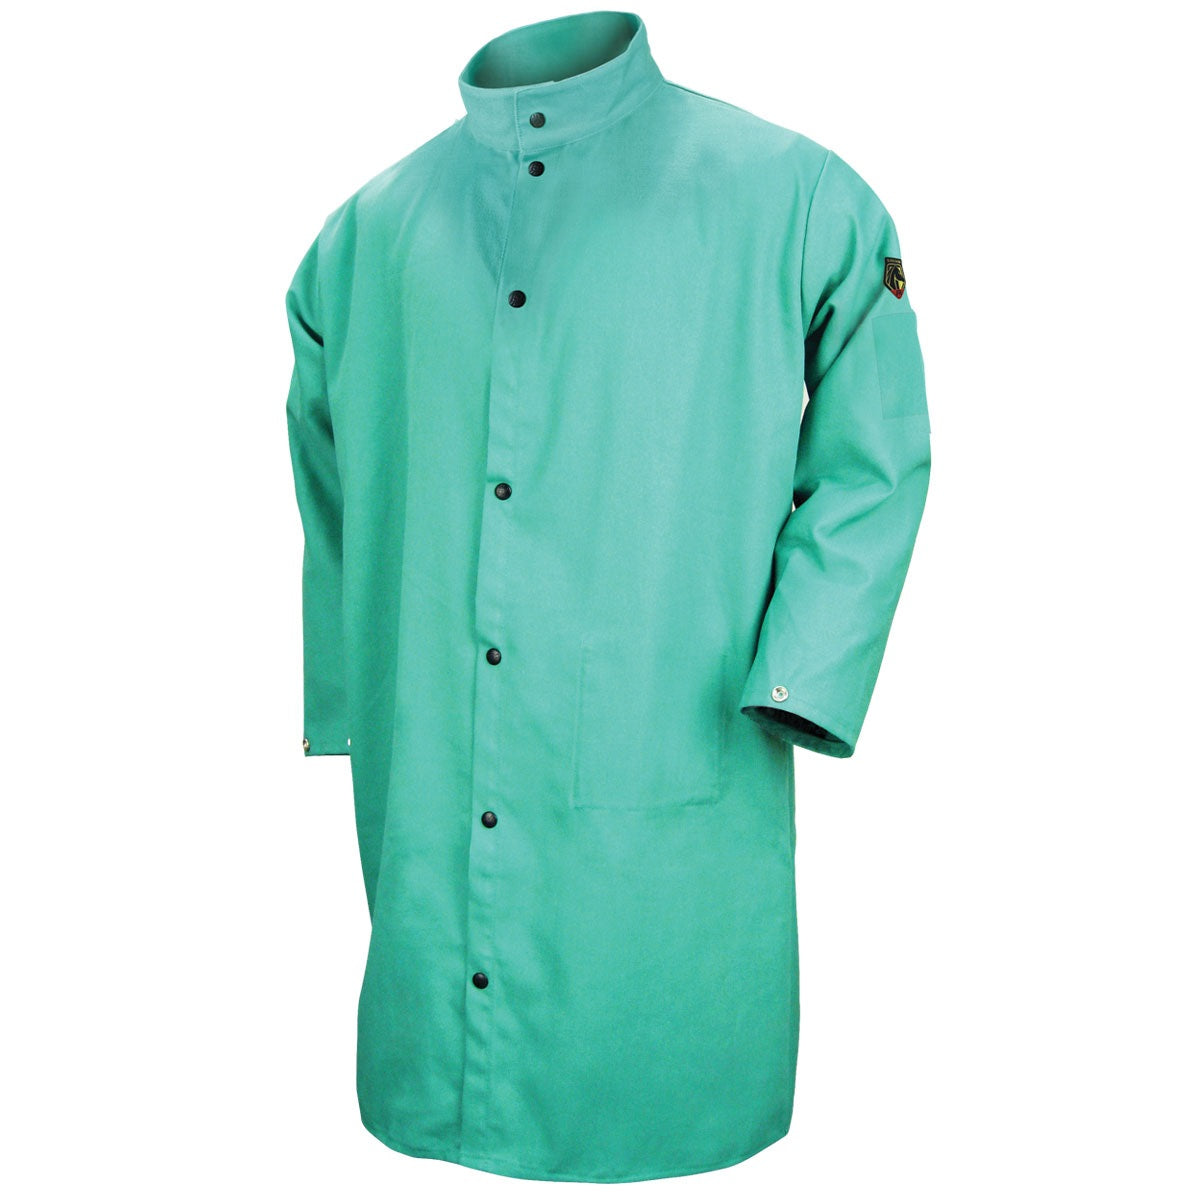 Revco Black Stallion 9oz Green FR Cotton Welding Coat for sale (F9-50C)  Buy at Welding Supplies from IOC